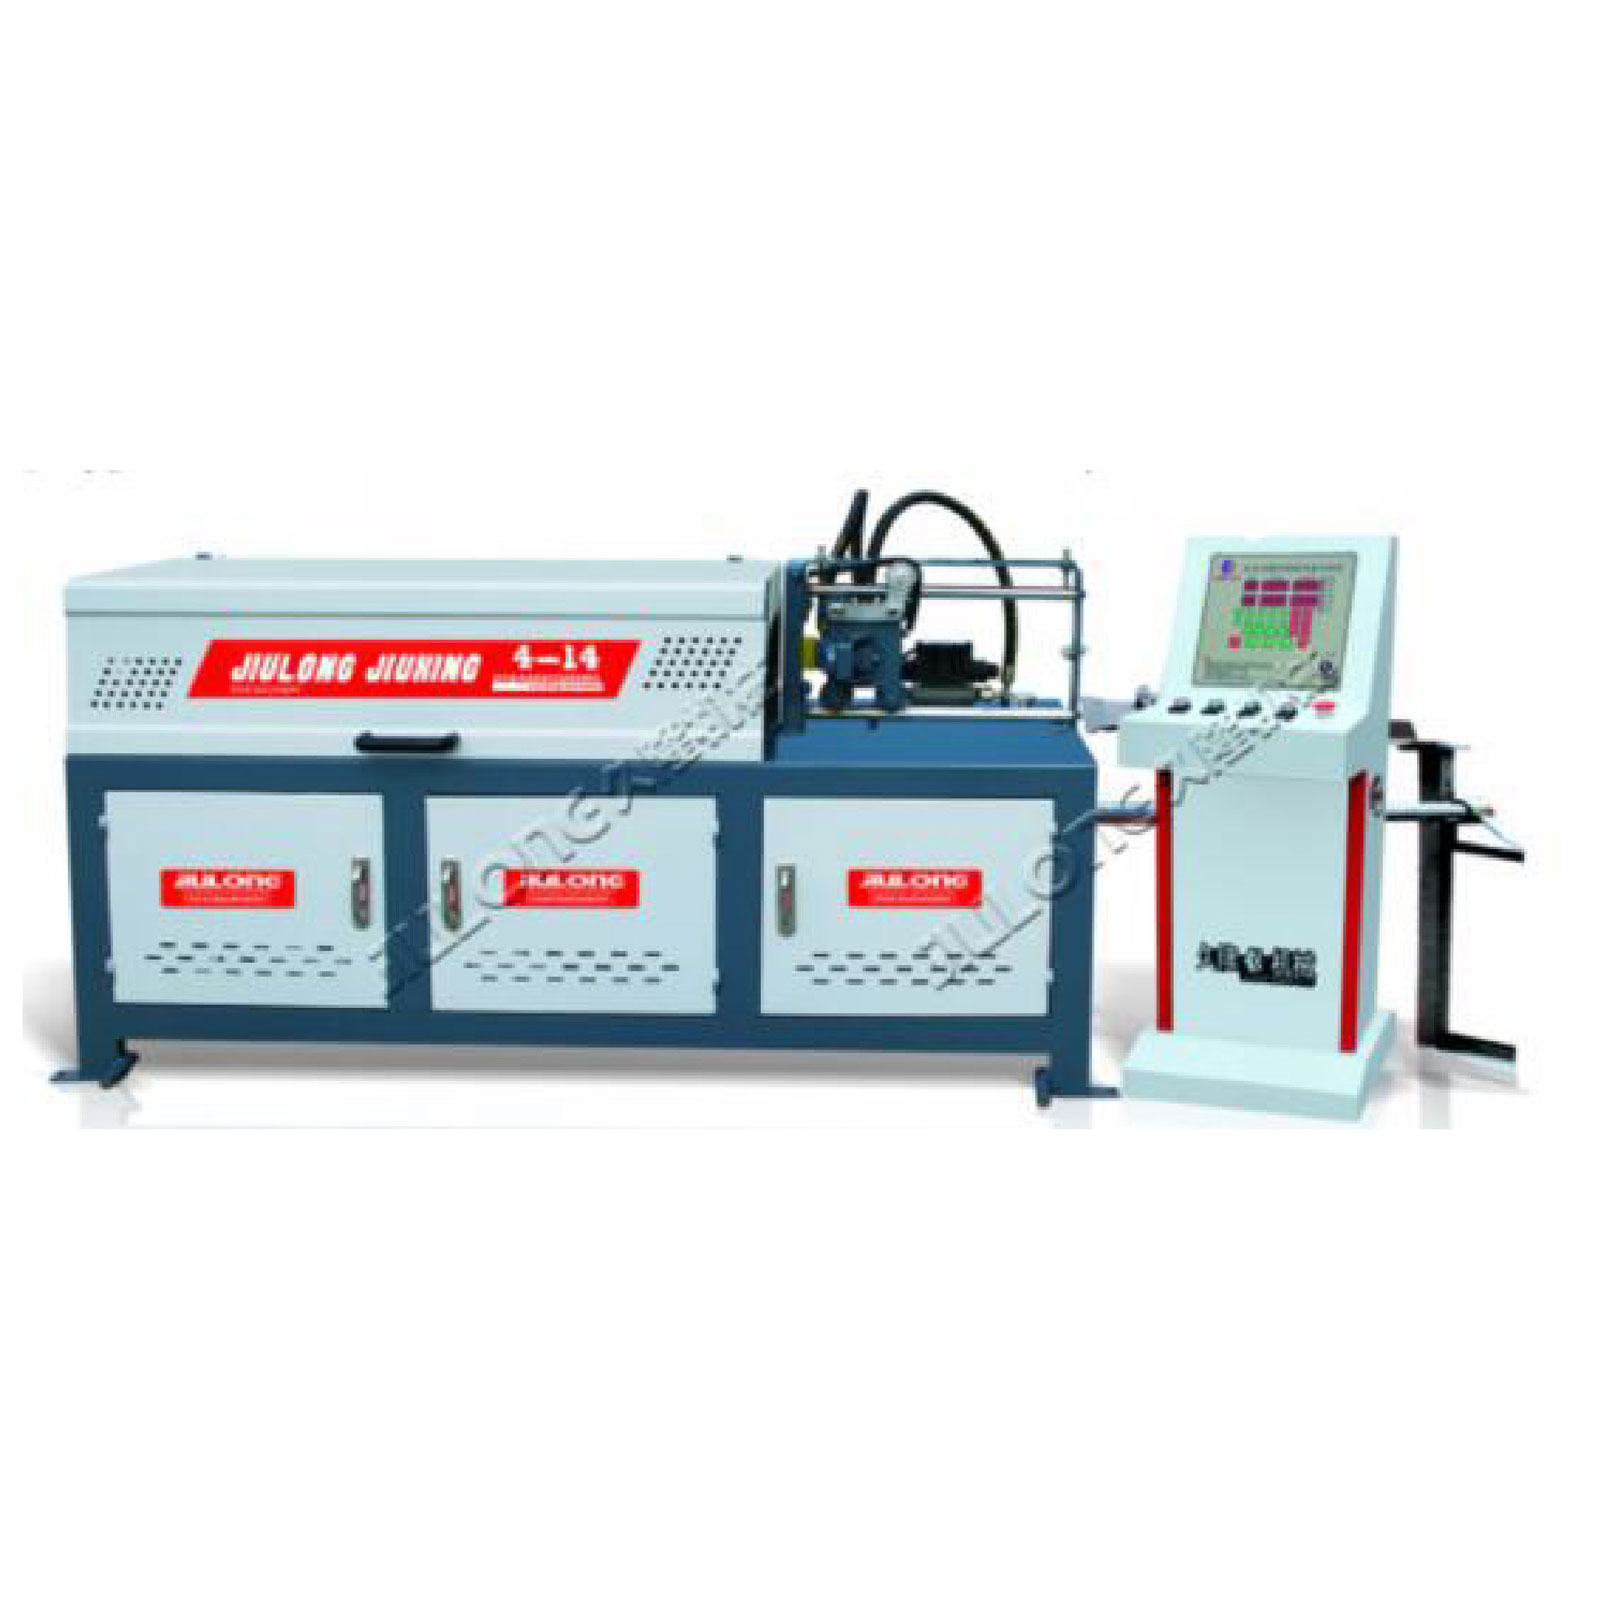 YGT4-14 Straightening and cutting machine (Single lead CNC)